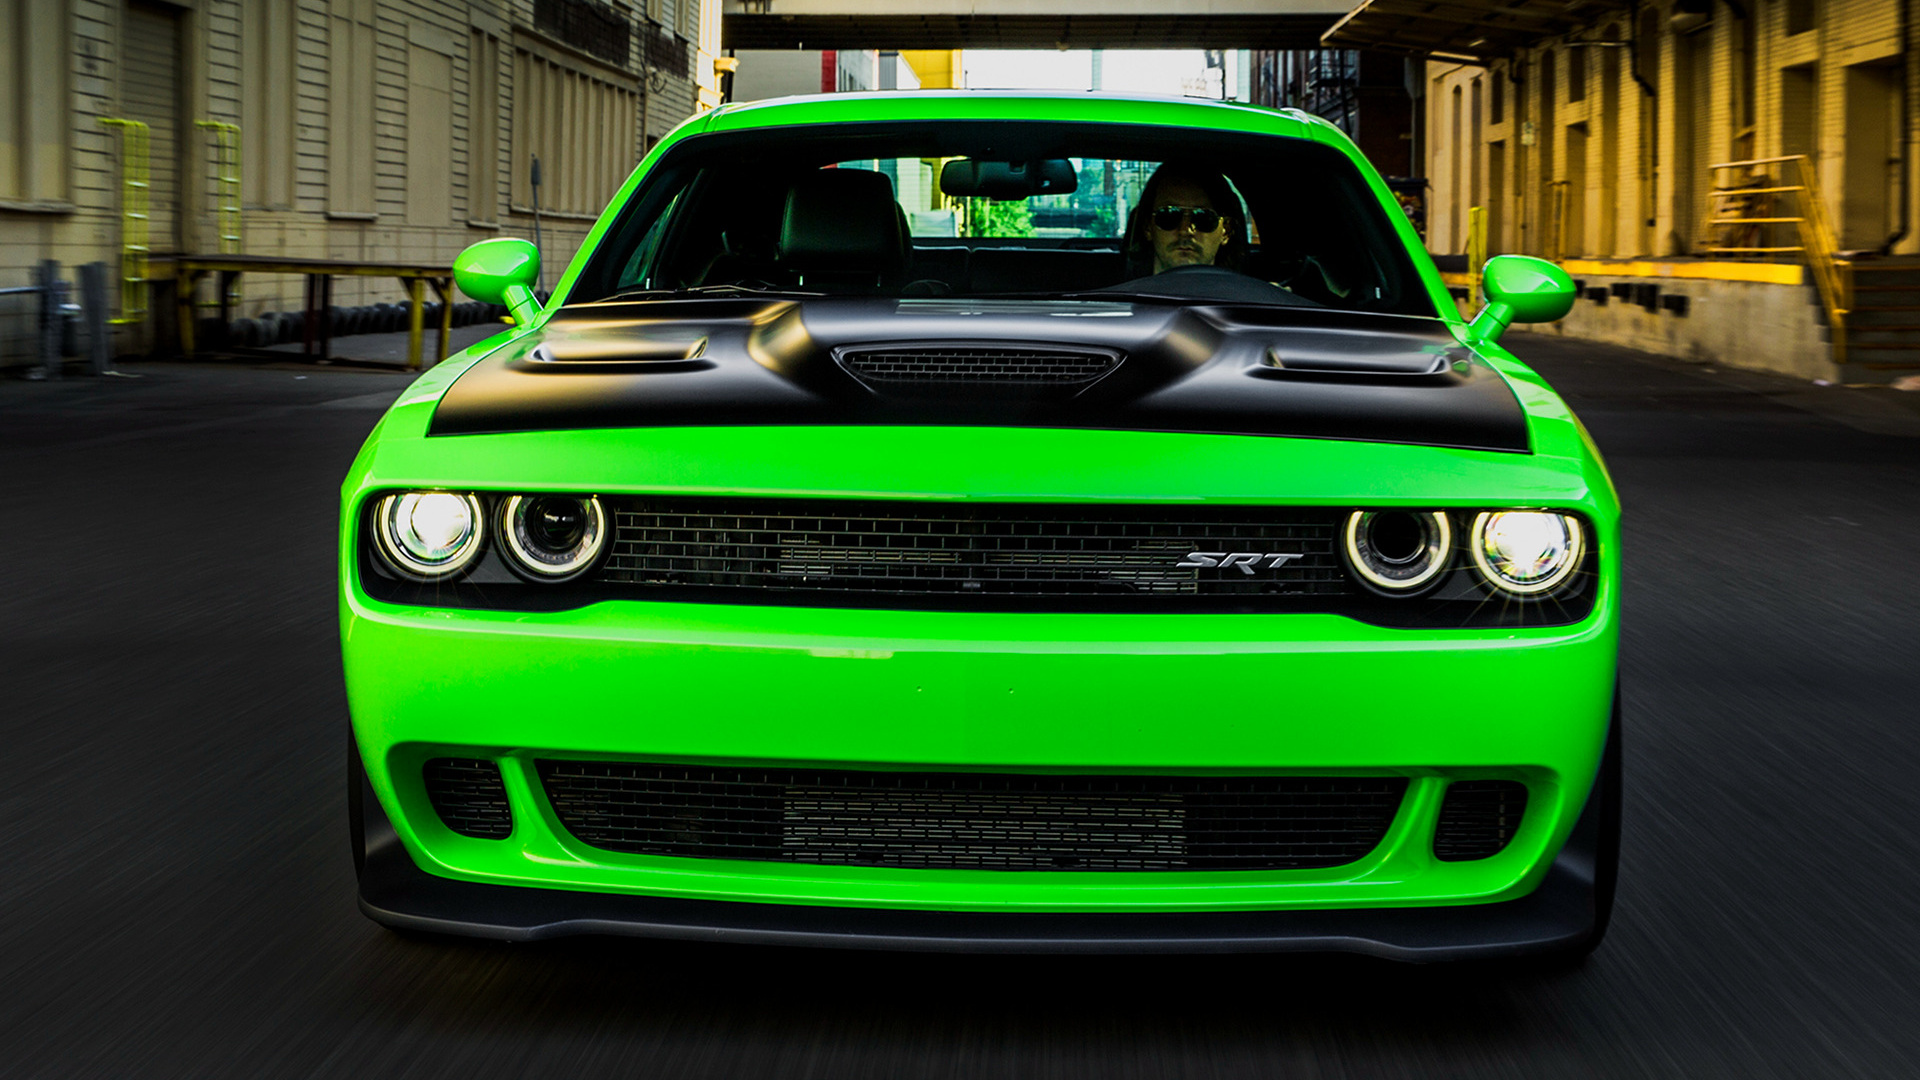 Dodge Challenger SRT Hellcat 2015 Wallpapers and HD Images